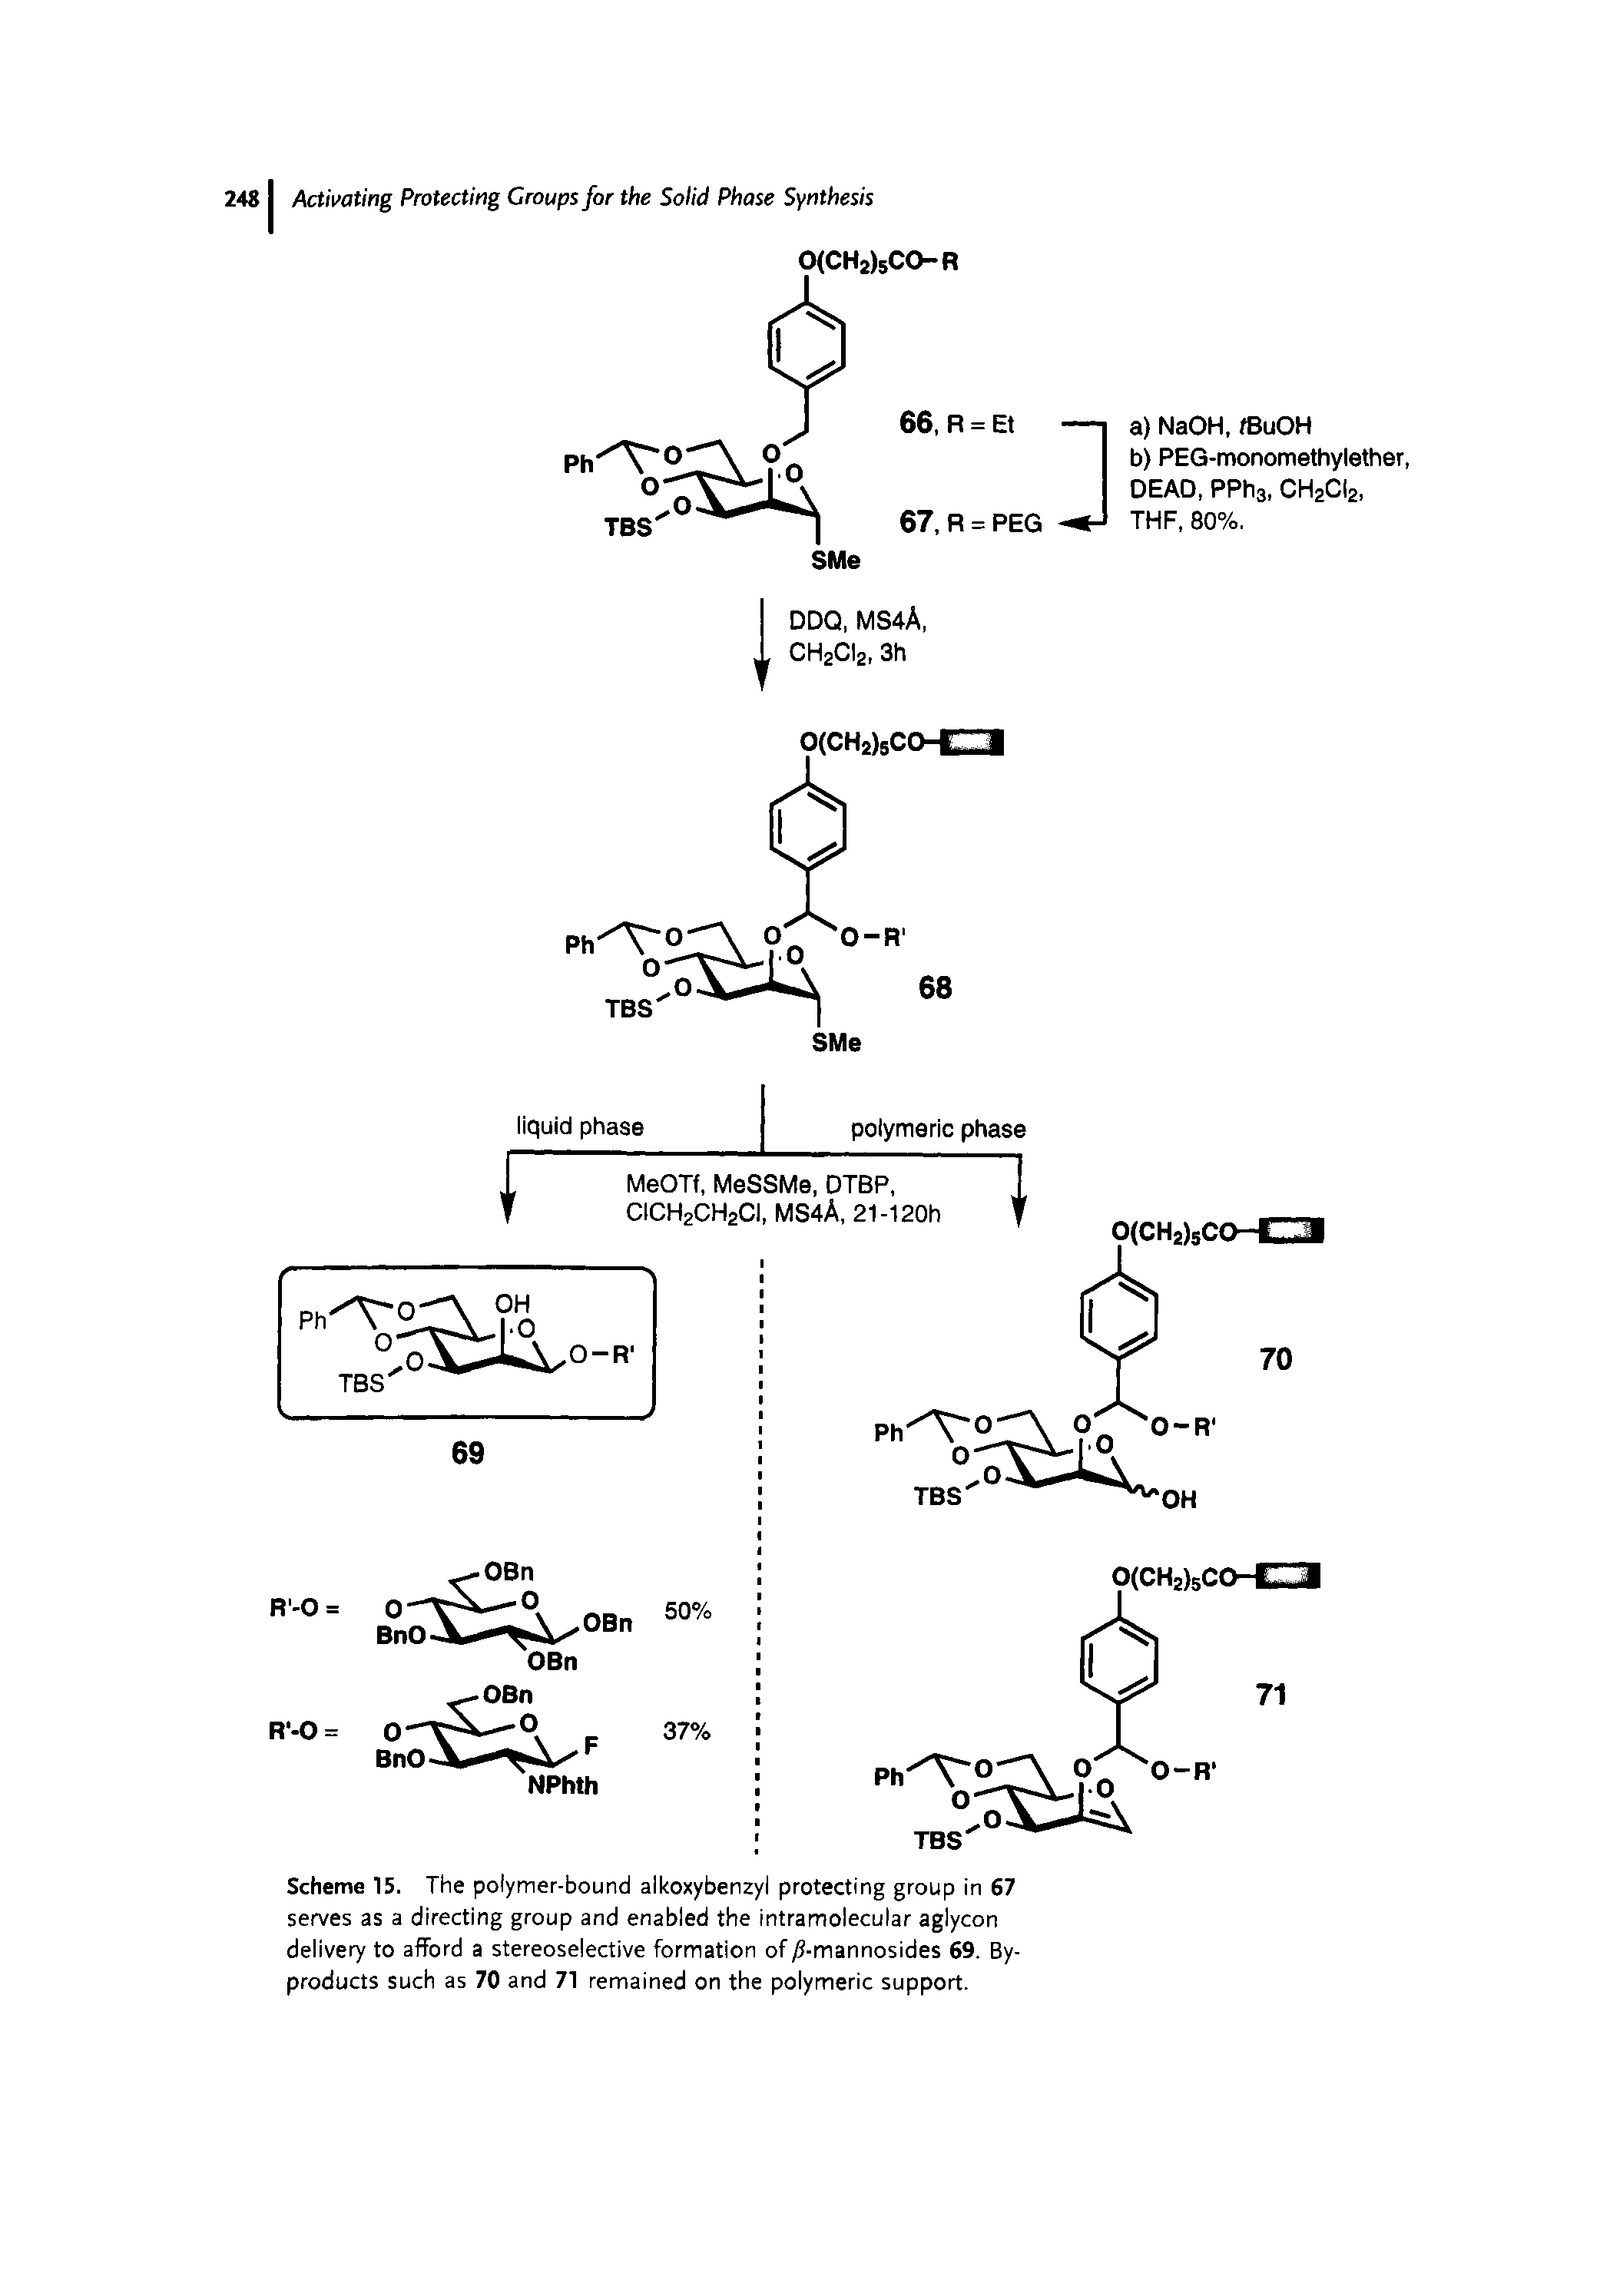 Scheme 15. The polymer-bound alkoxybenzyl protecting group in 67 serves as a directing group and enabled the intramolecular aglycon delivery to afford a stereoselective formation of /1-mannosides 69. Byproducts such as 70 and 71 remained on the polymeric support.